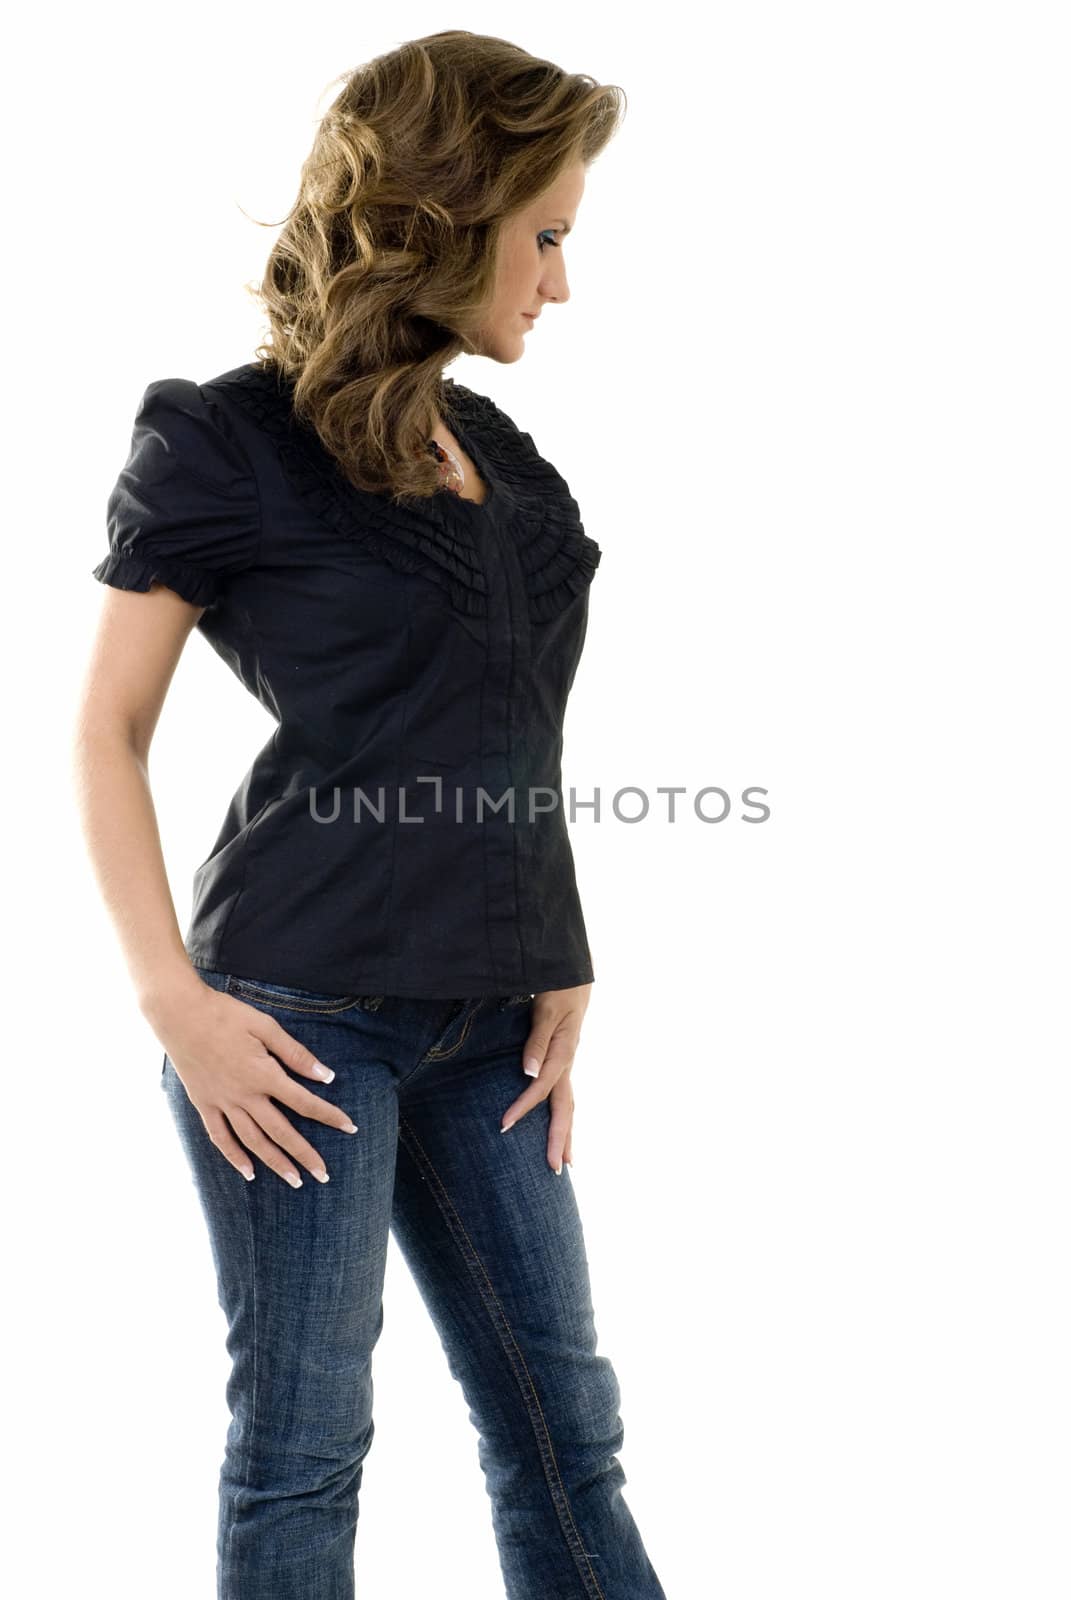 A beautiful model on a white isolated background.